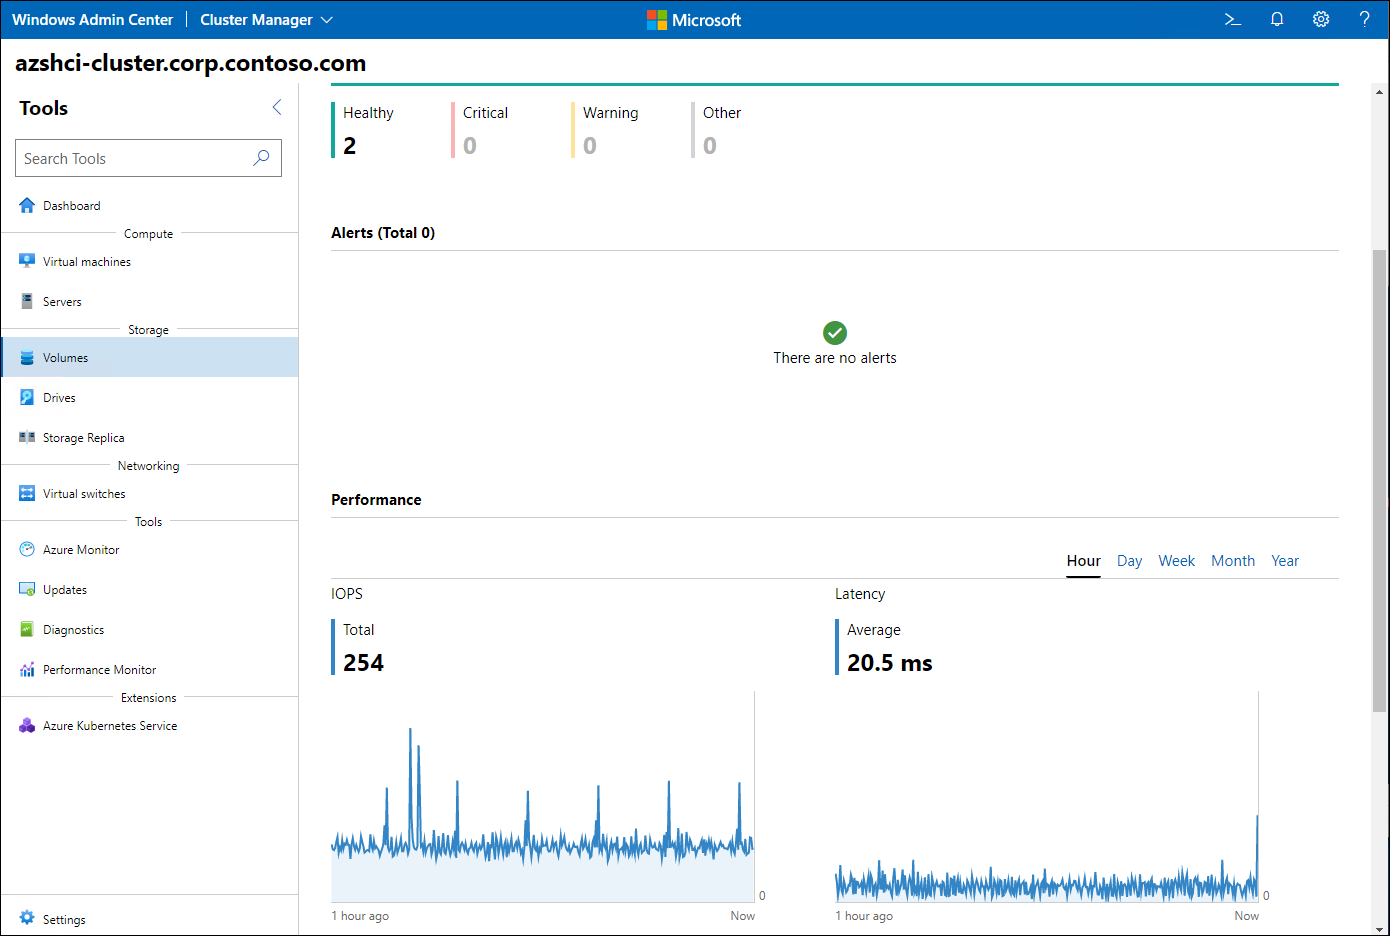 The screenshot depicts the Windows Admin Center dashboard displaying information about the status and performance of cluster volumes.